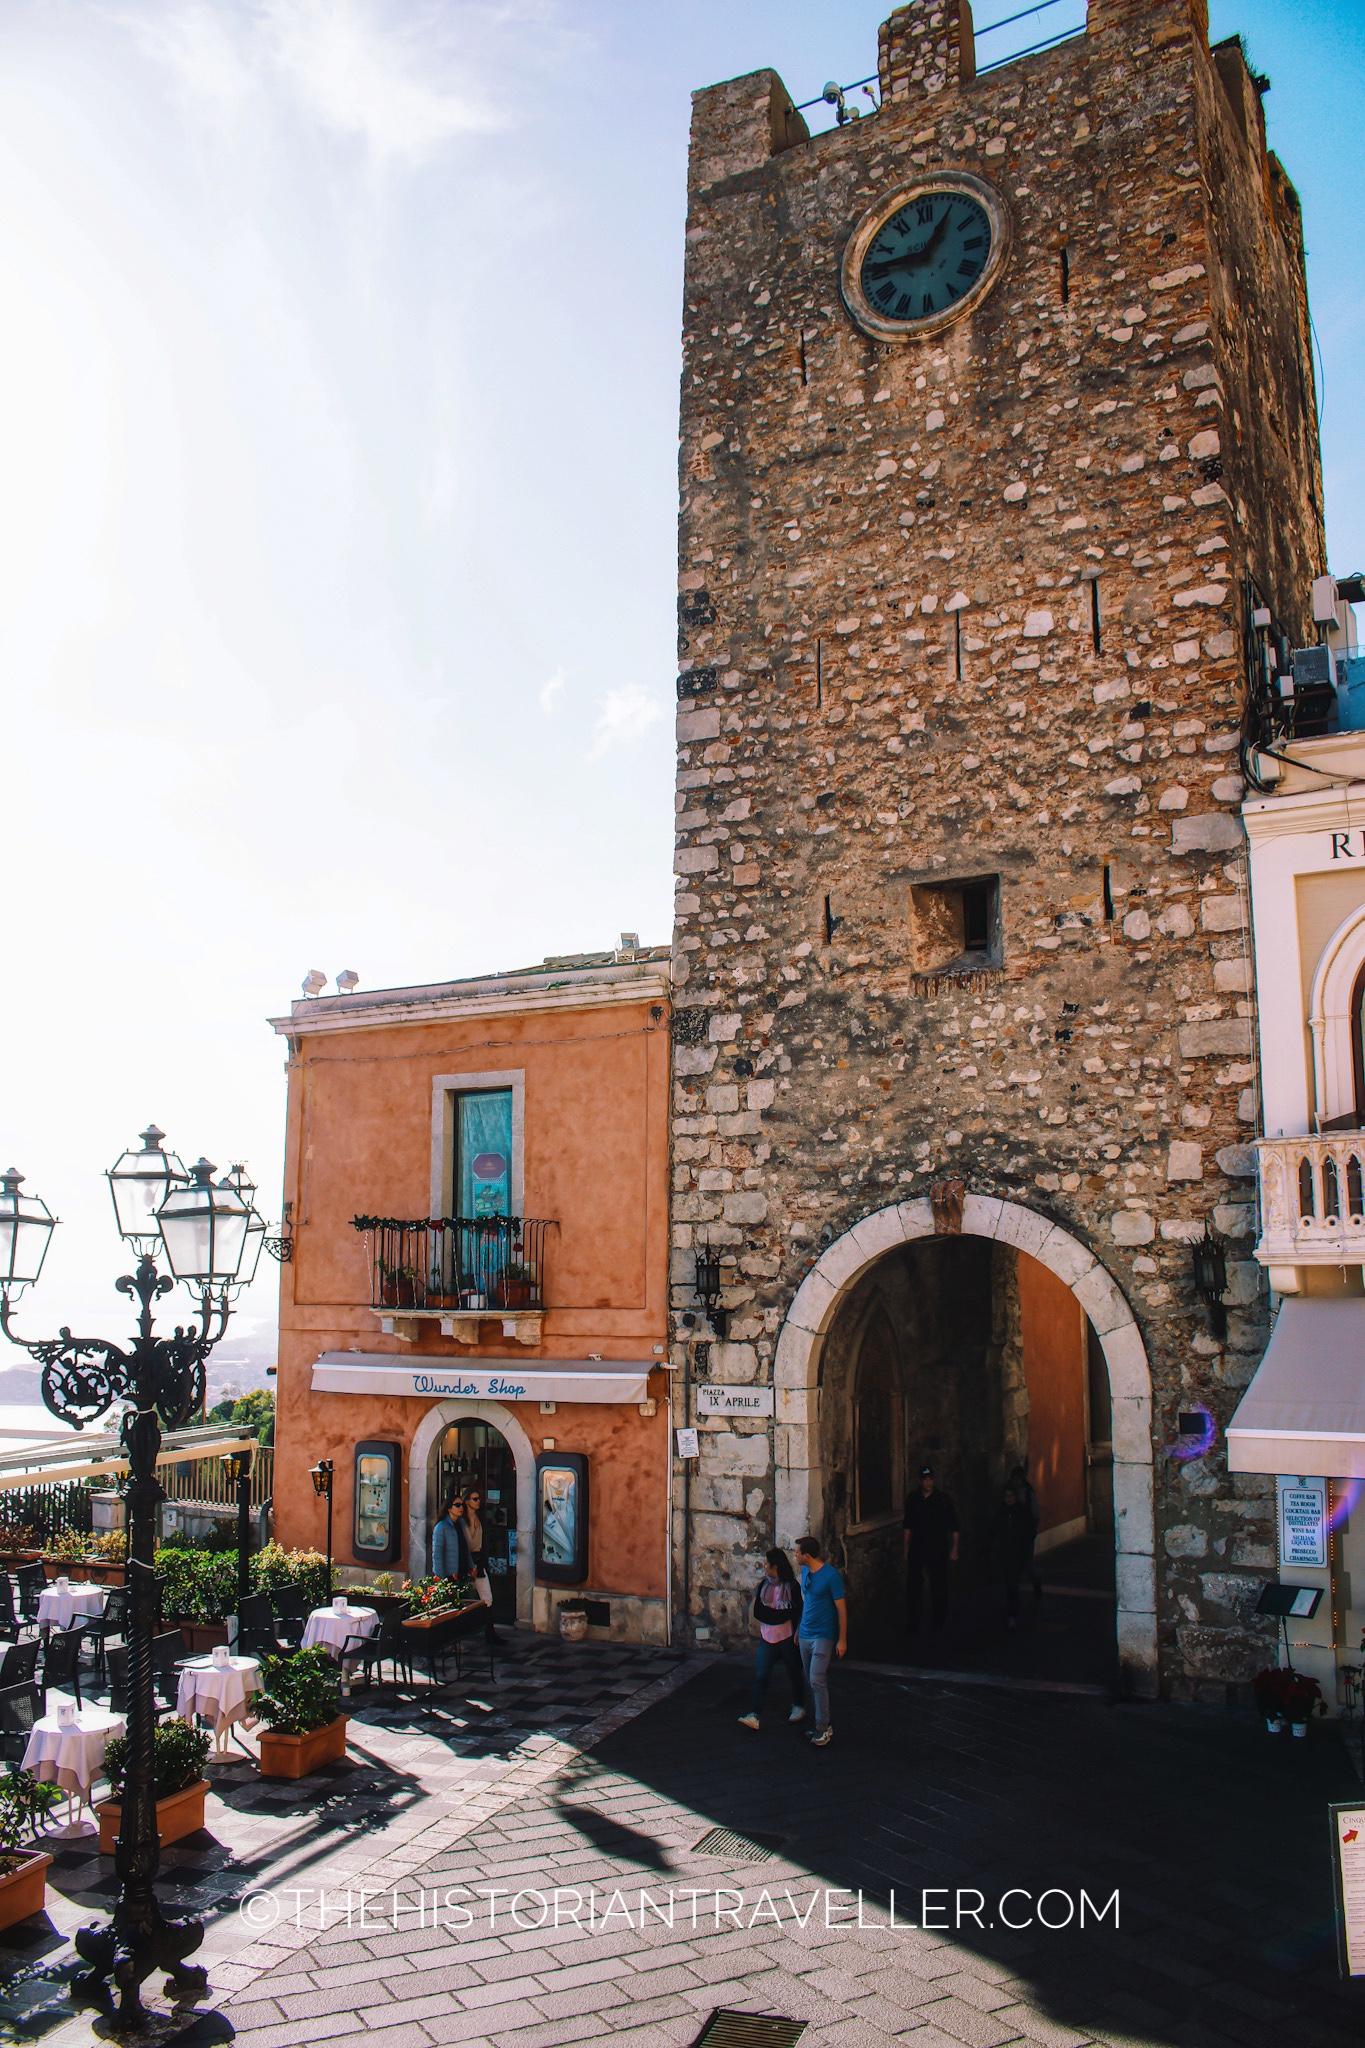 An insider's guide to Taormina - The Clock Tower and Byzantine Mosaic